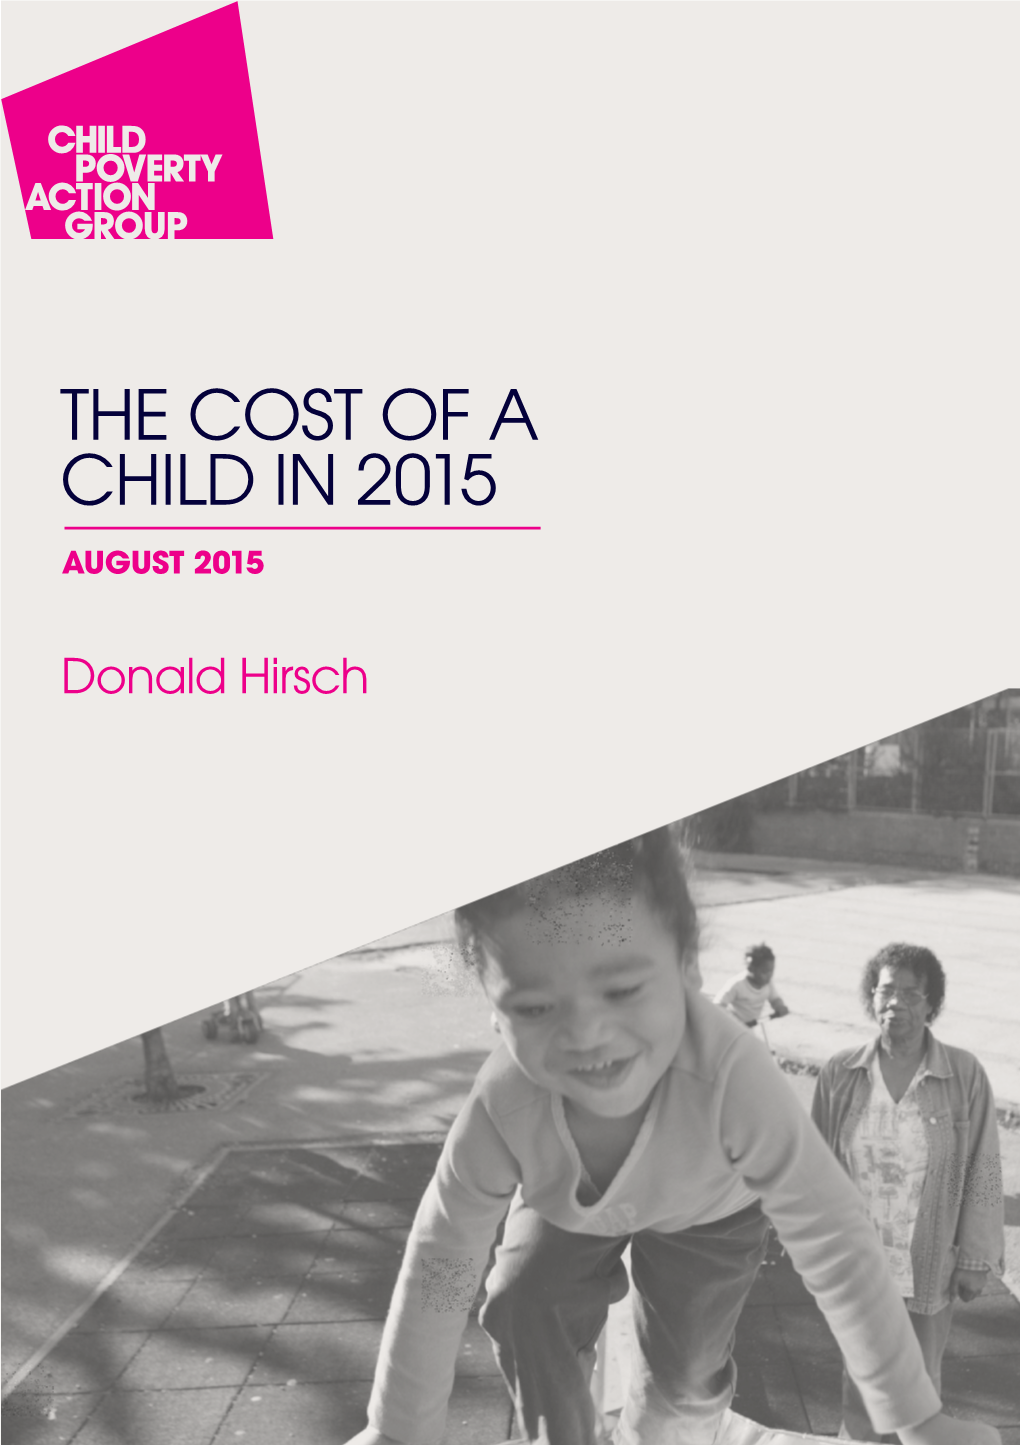 The Cost of a Child in 2015 August 2015